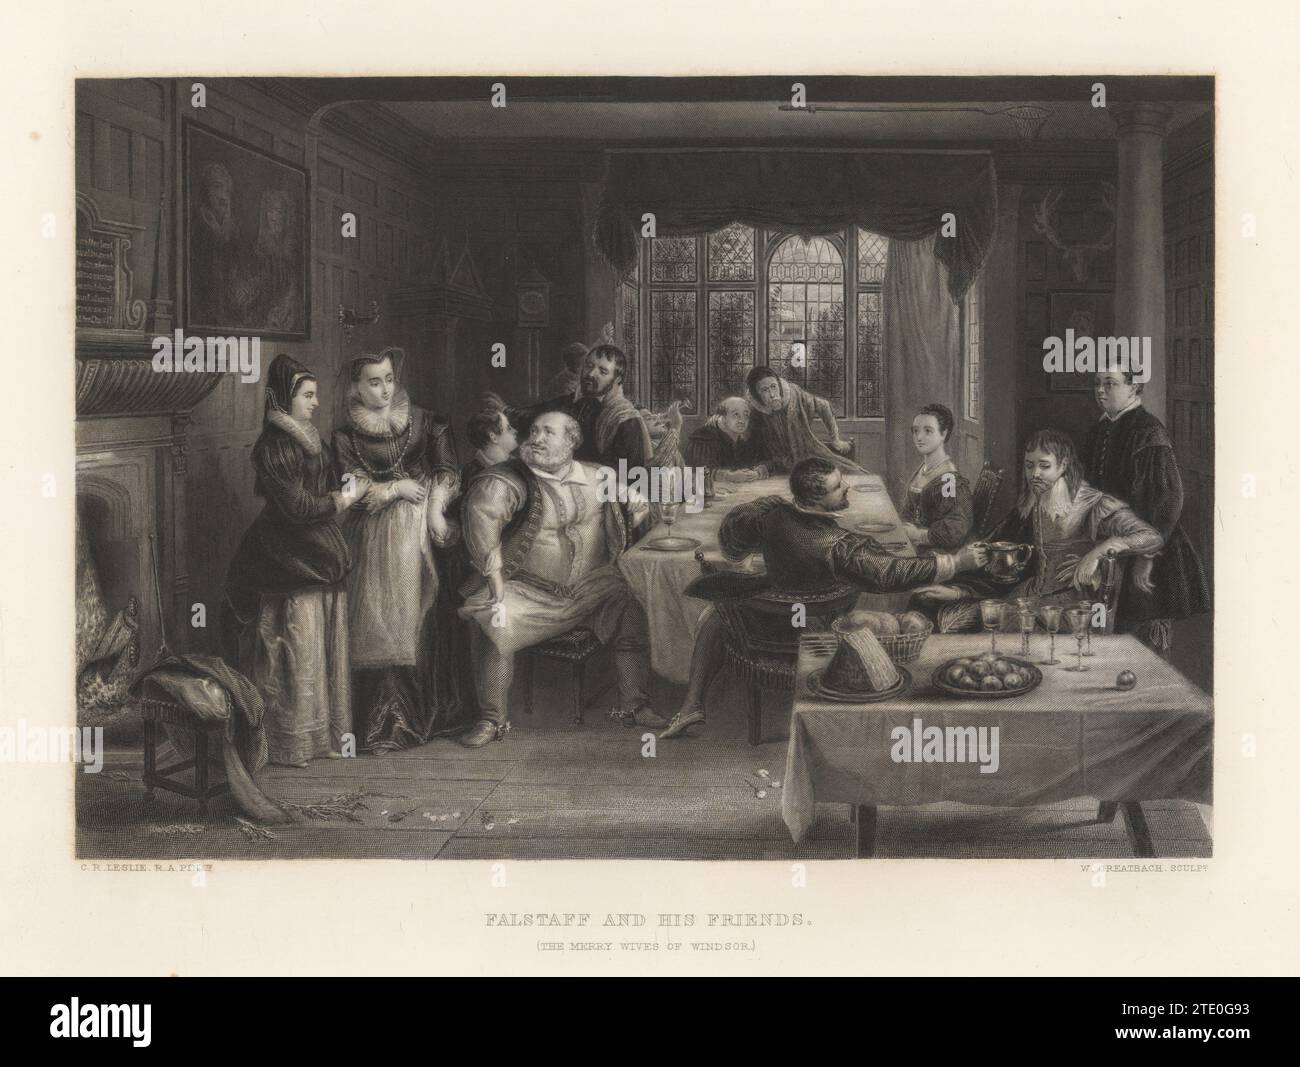 Sir John Falstaff and his friends in William Shakespeare's The Merry Wives of Windsor. Falstaff sits at a large dining table in the Garter Inn surrounded by his men drinking wine, Act 1, scene 2.. Engraving on steel by William Greatbach after a painting in the Sheepshanks Collection by Charles Robert Leslie in The Works of Shakespeare, edited by Charles Knight, Virtue & Yorston, New York, 1880. Stock Photo